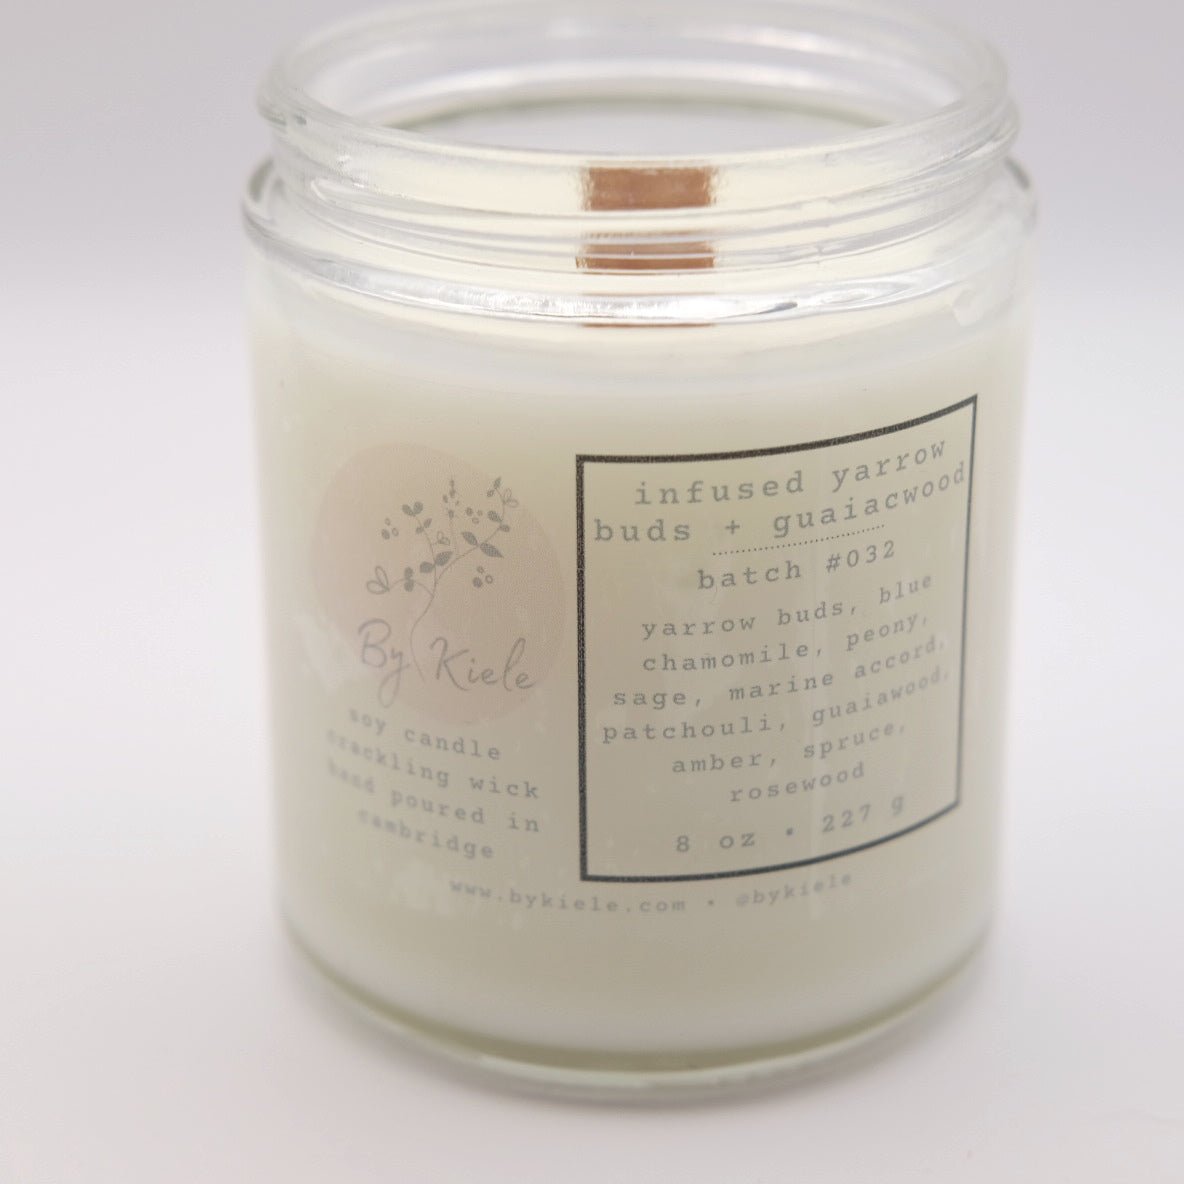 infused yarrow buds + guaiacwood candle - infused yarrow buds + guaiacwood candle - by kiele